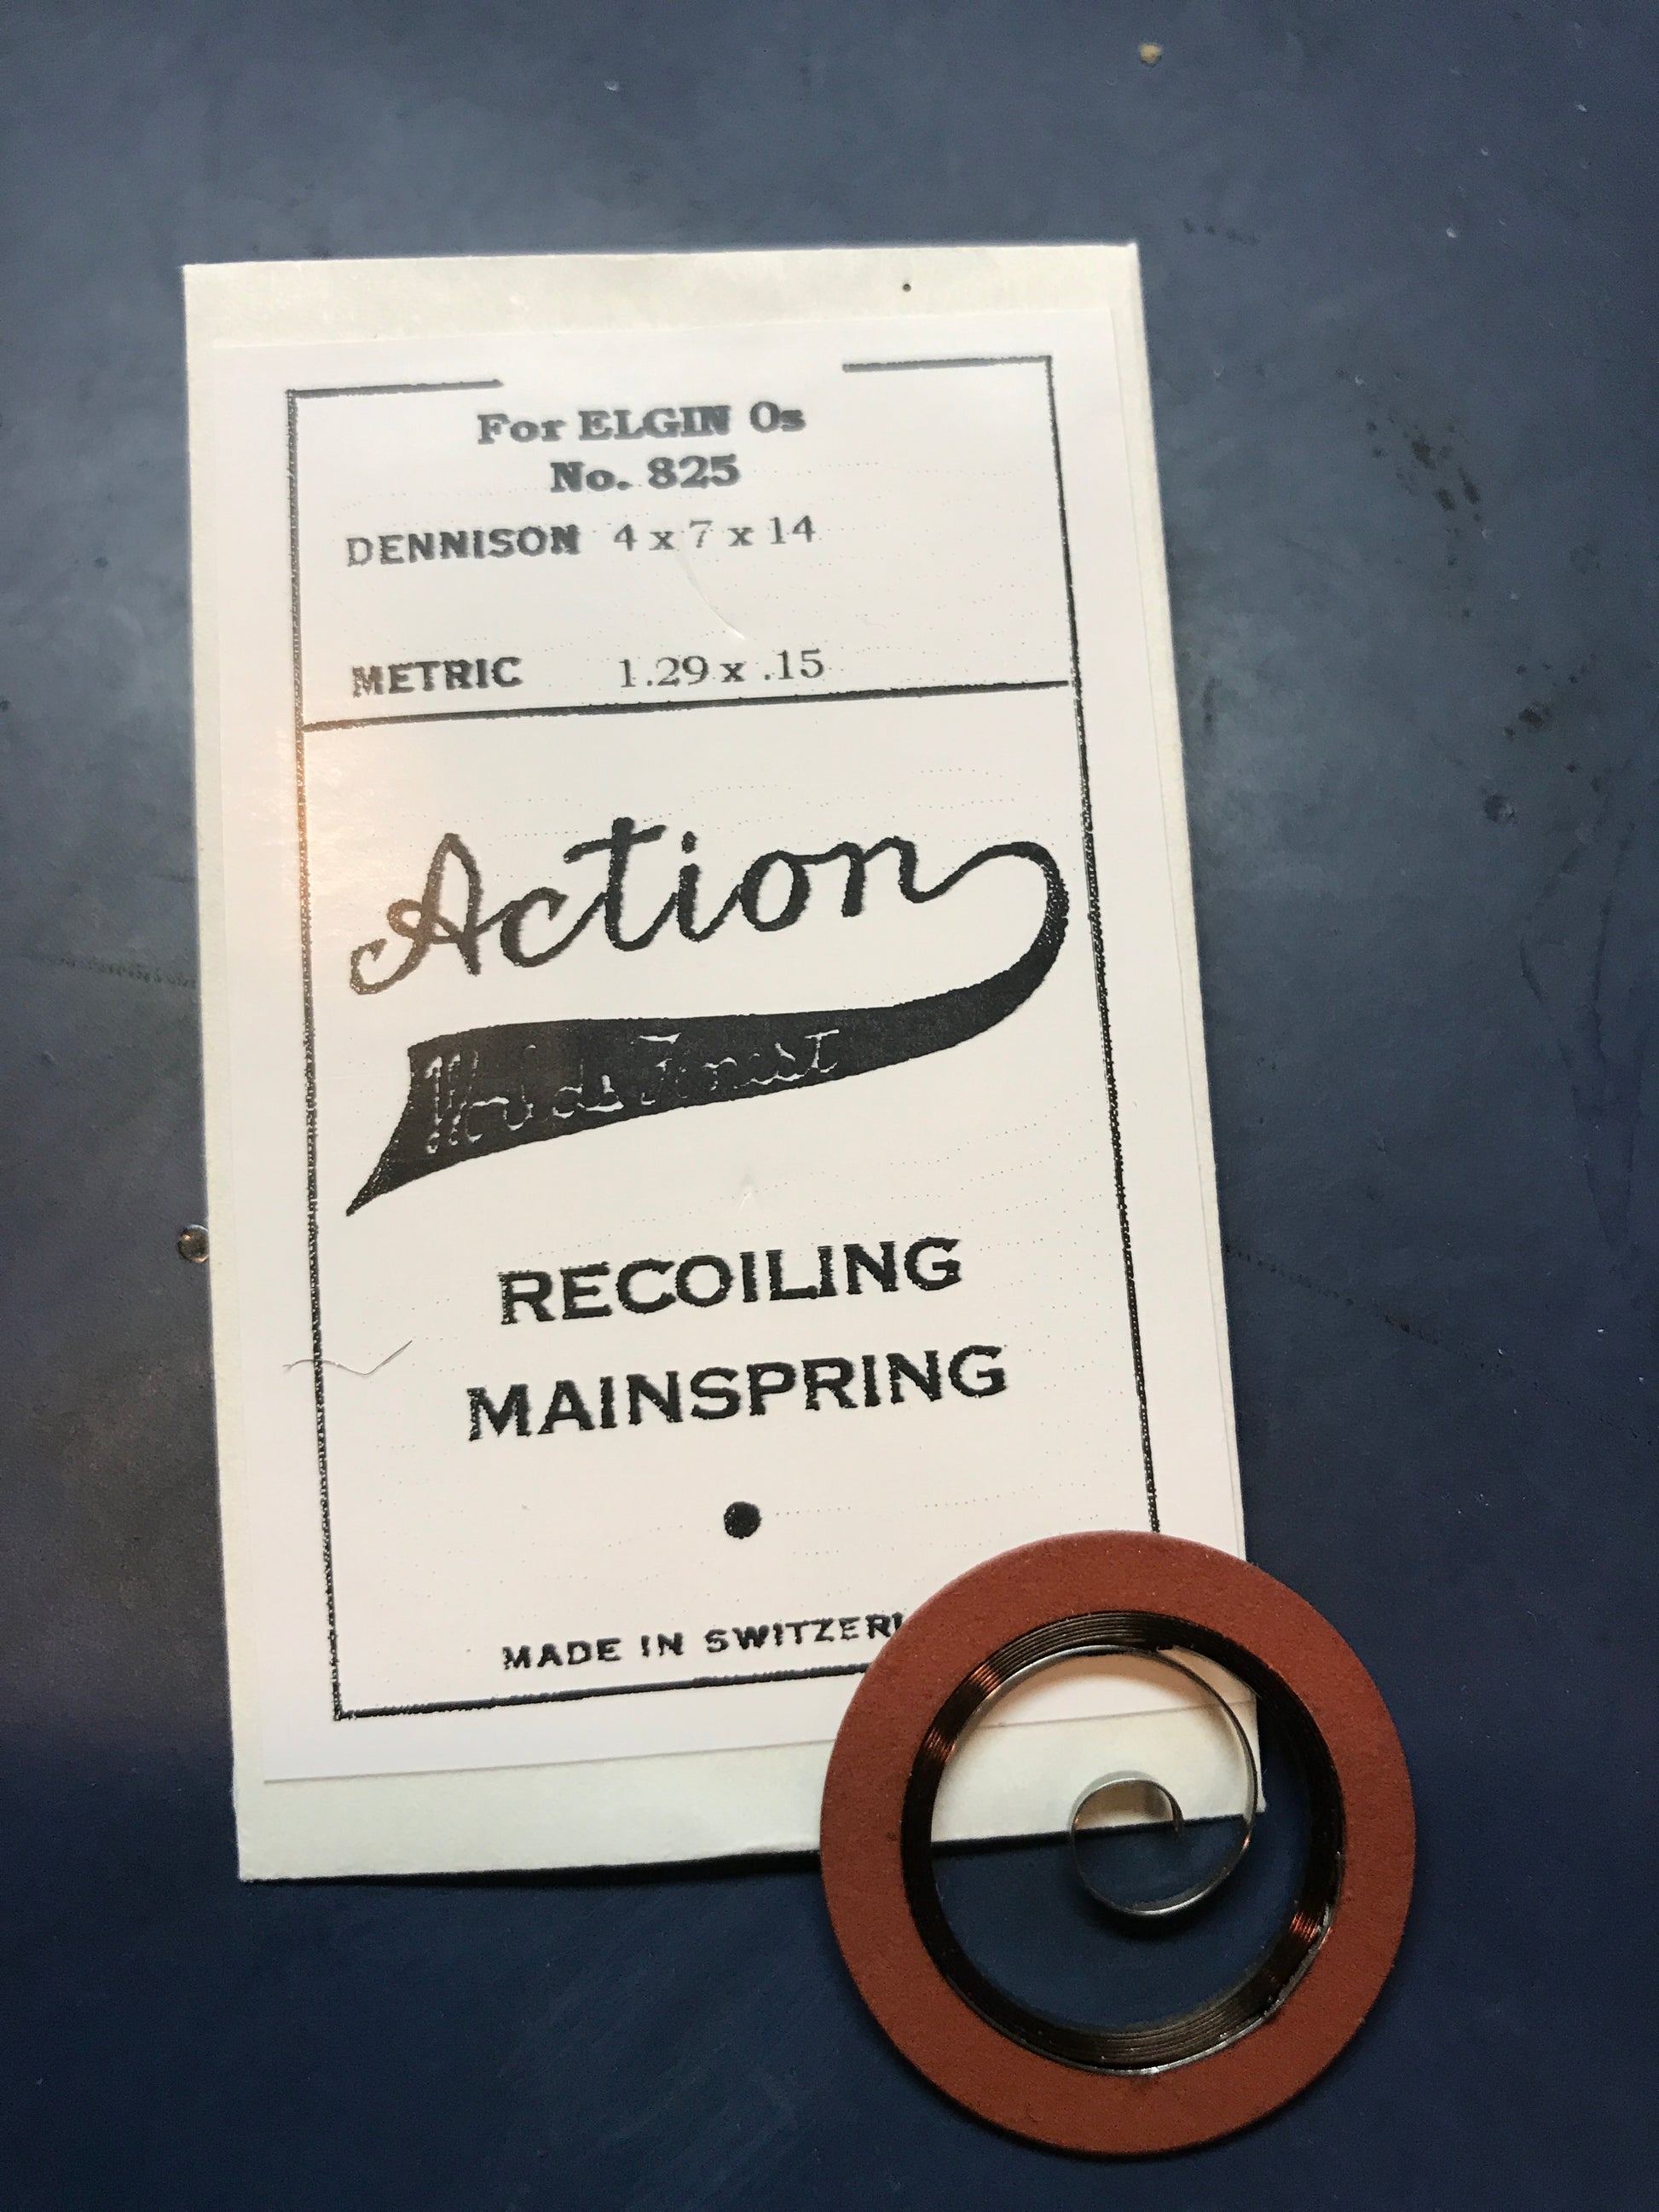 Action Mainspring for 0s Elgin No. 825 - Steel